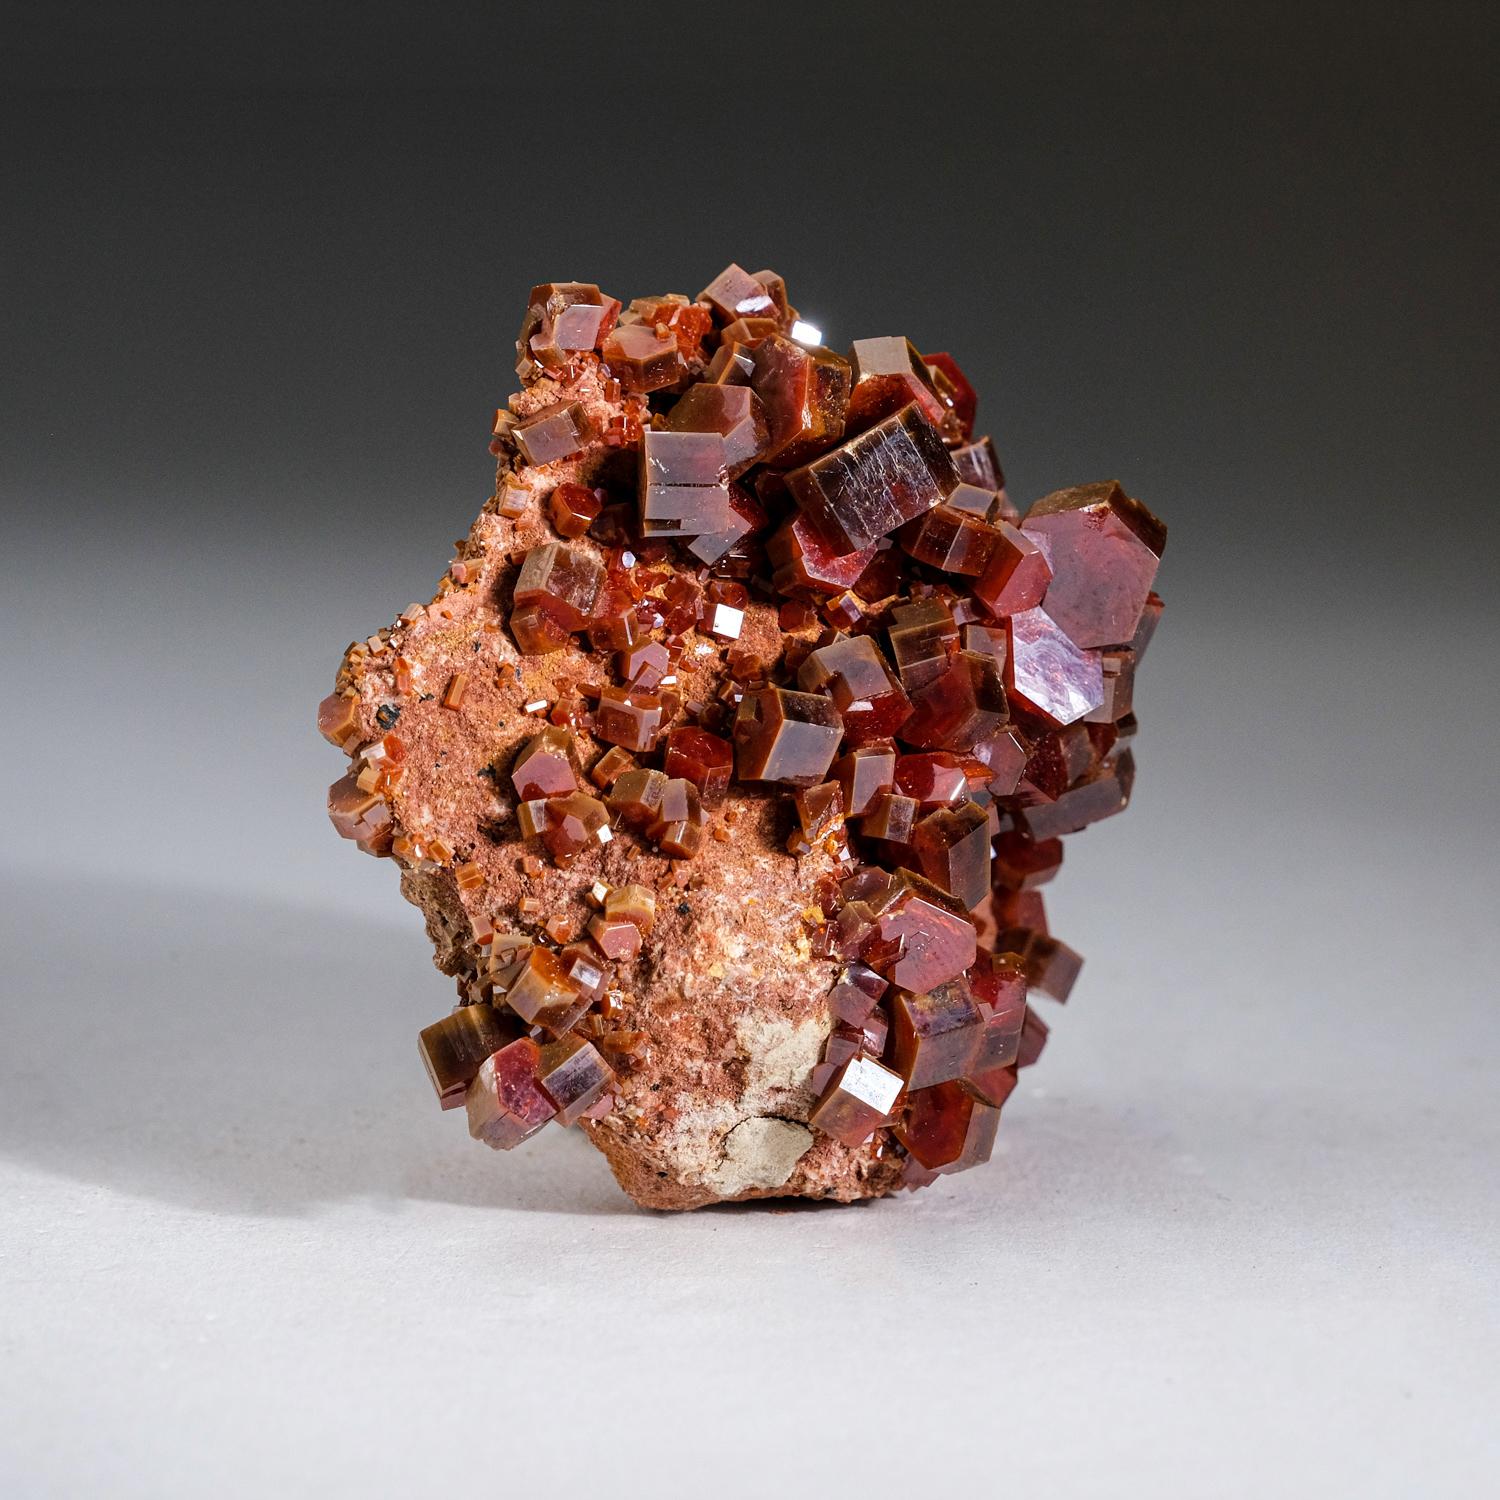 Other Genuine Vanadinite Crystal Cluster on Matrix from Morocco (183.4 grams) For Sale